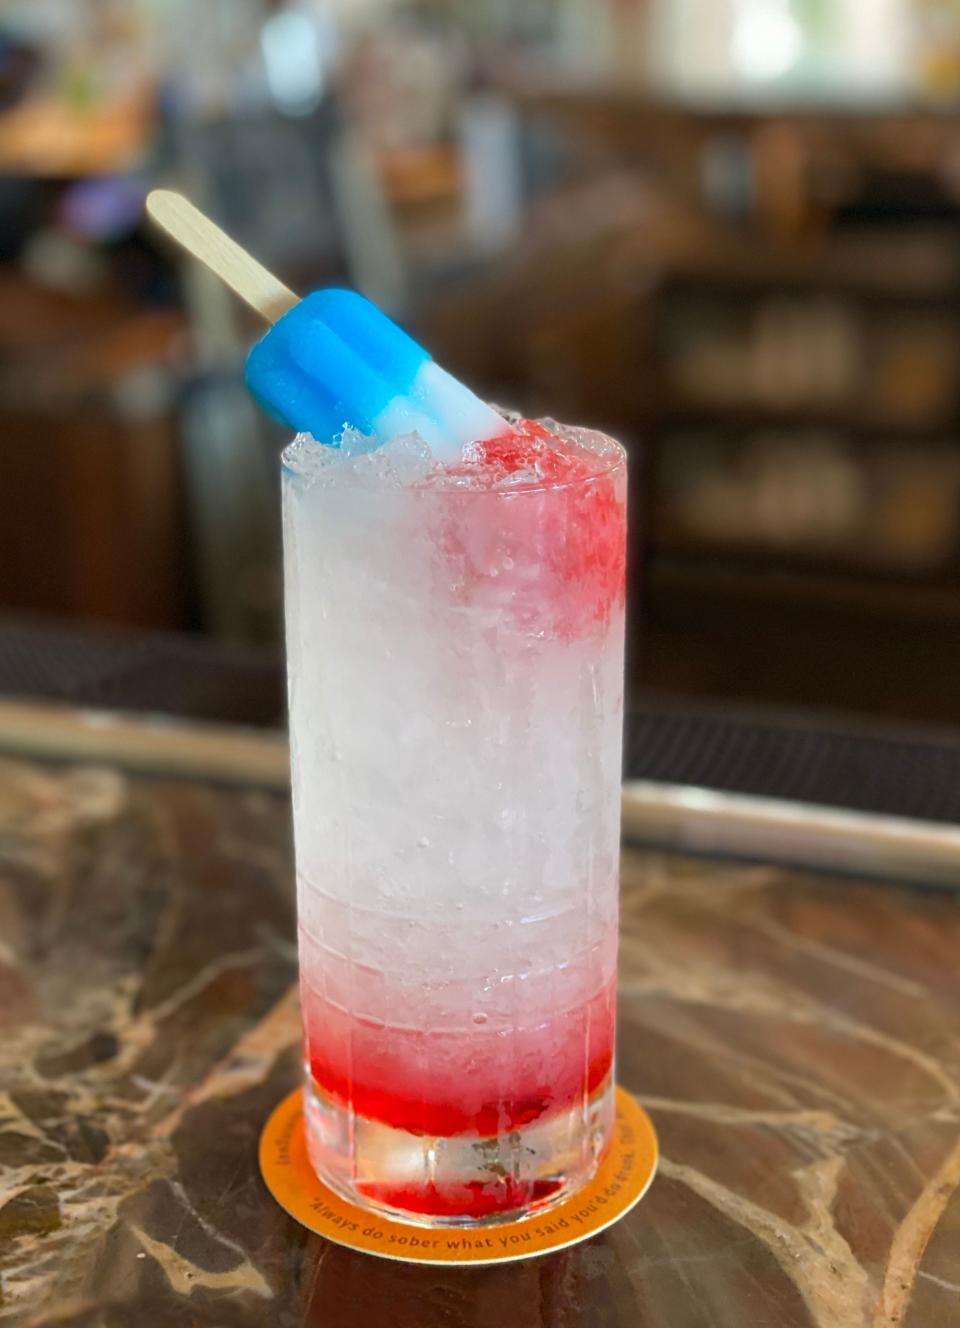 The Patriotic Pop cocktail will be featured July 4 at Henry's.